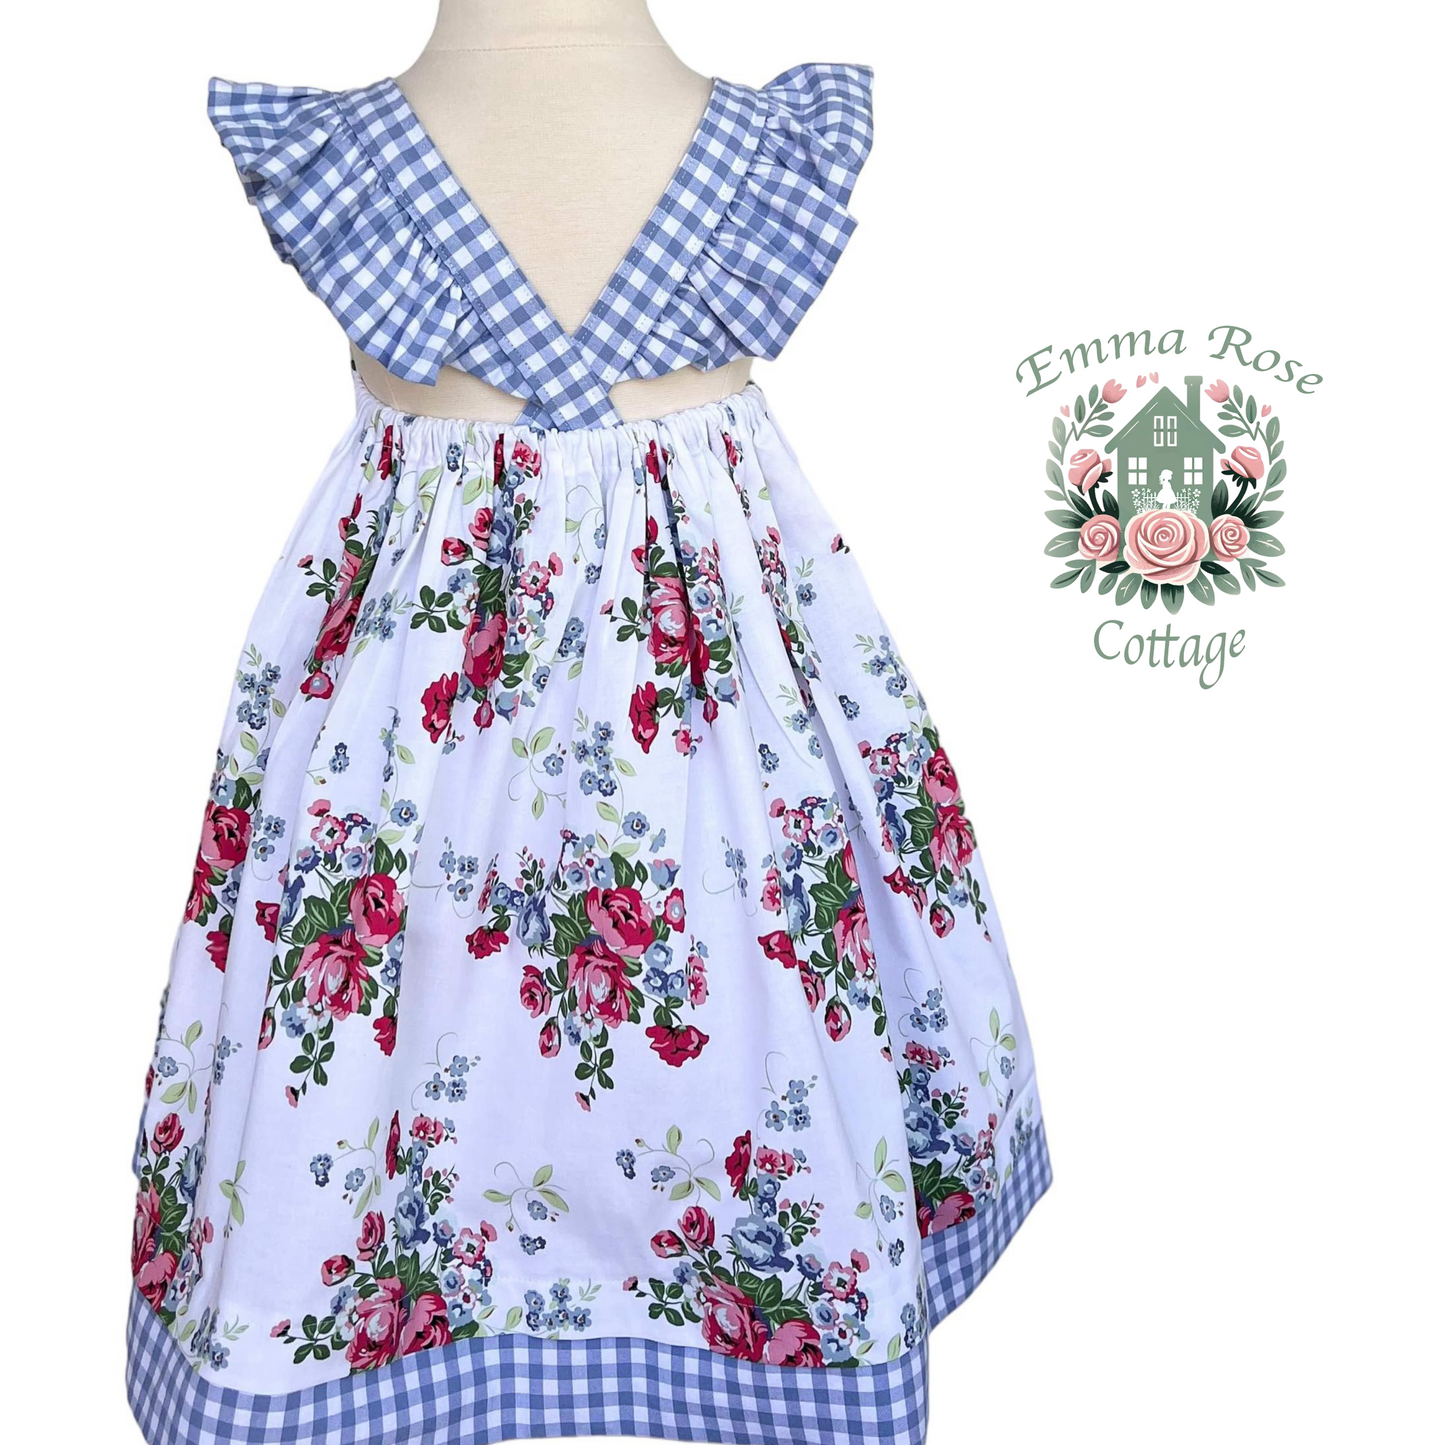 Roses & Ruffles size 5, Blue Gingham, Free Shipping